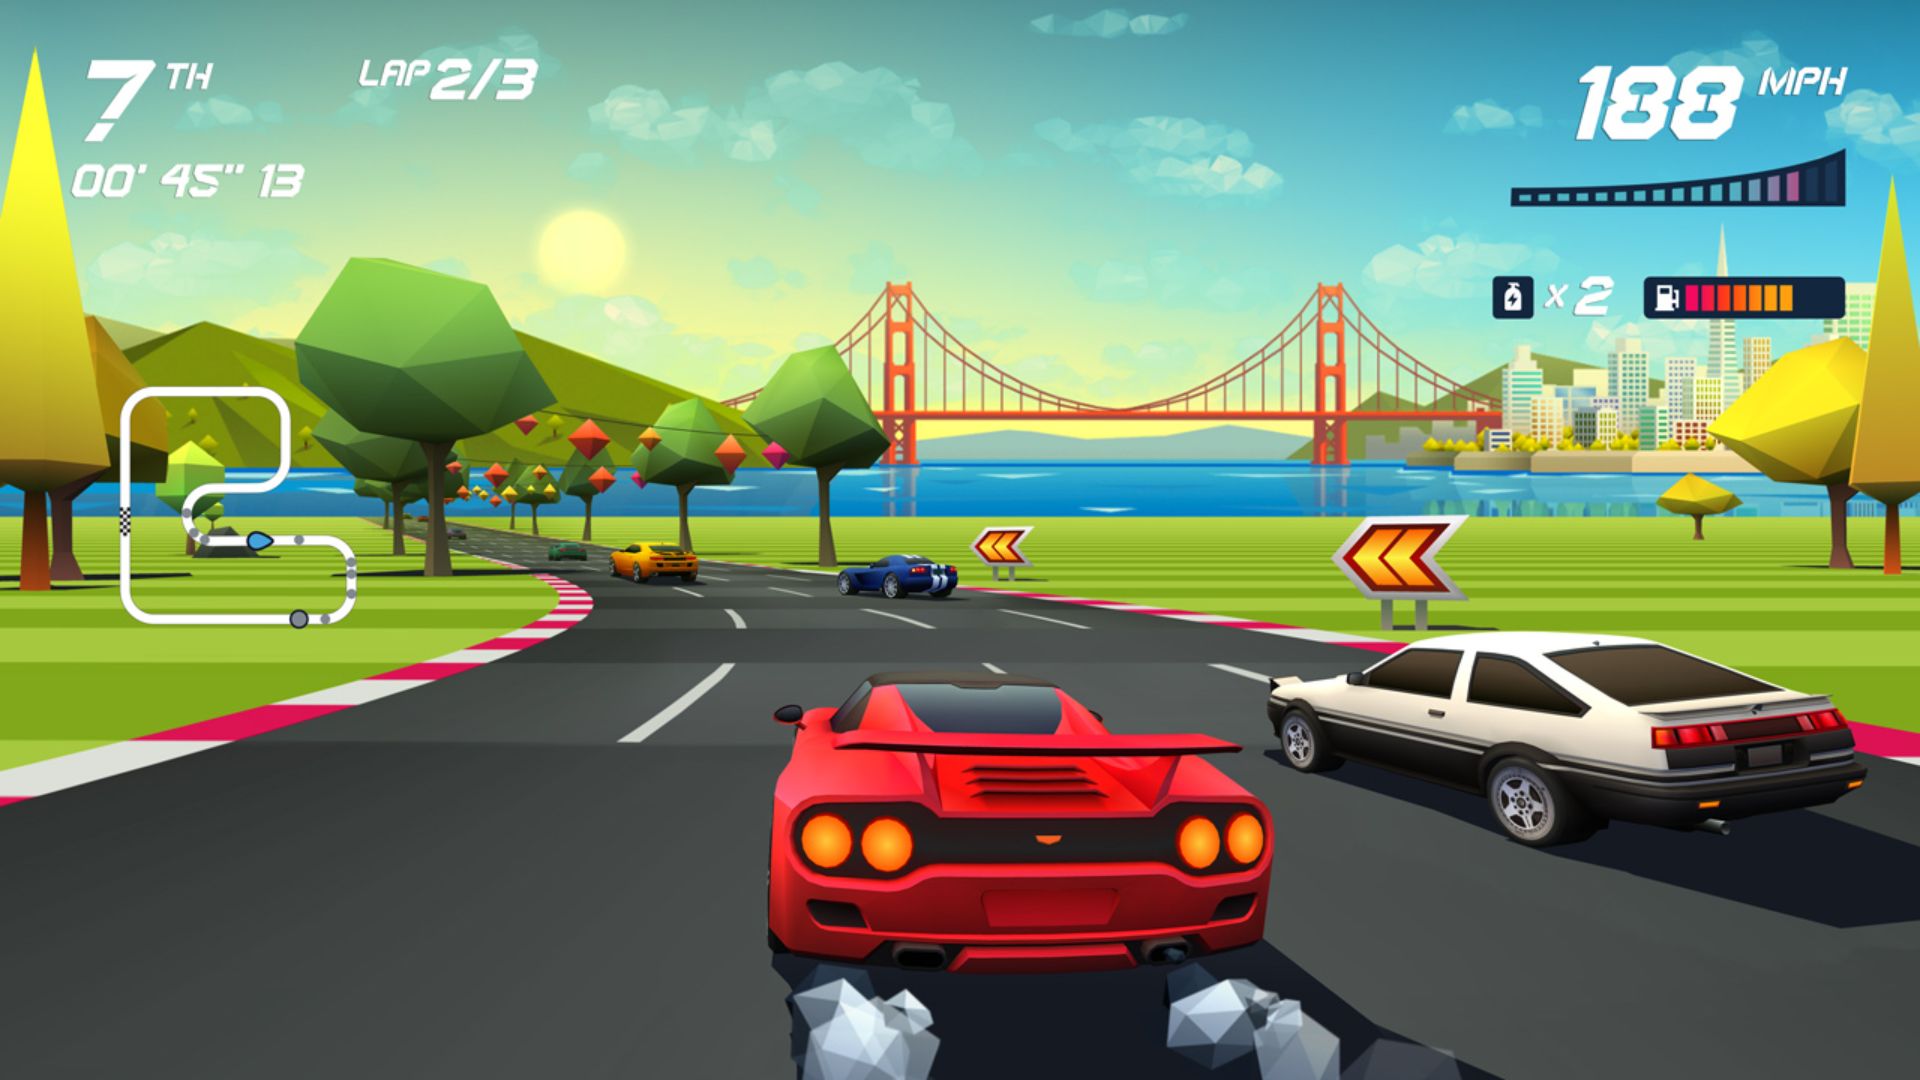 Best Switch racing games: A red sports car tries to catch up with other racers in Horizon Chase Turbo